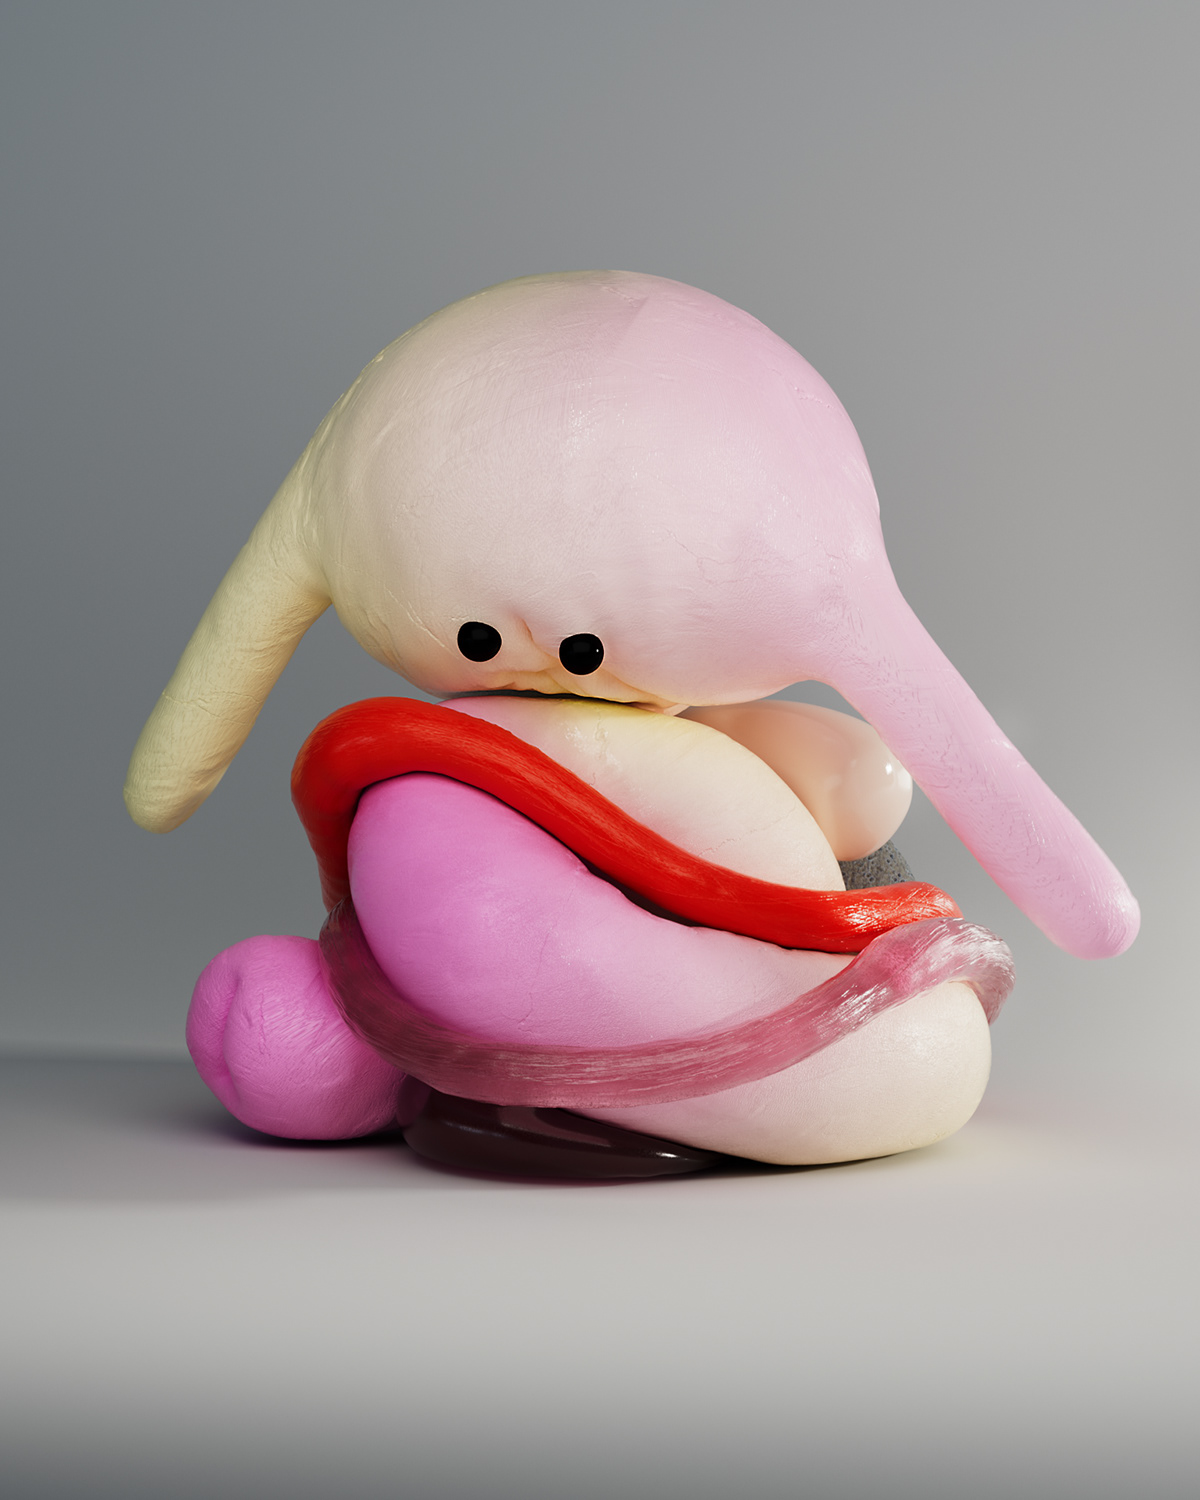 Artifact from the Exploring the Art of 3D Soft Body Character Design article on Abduzeedo